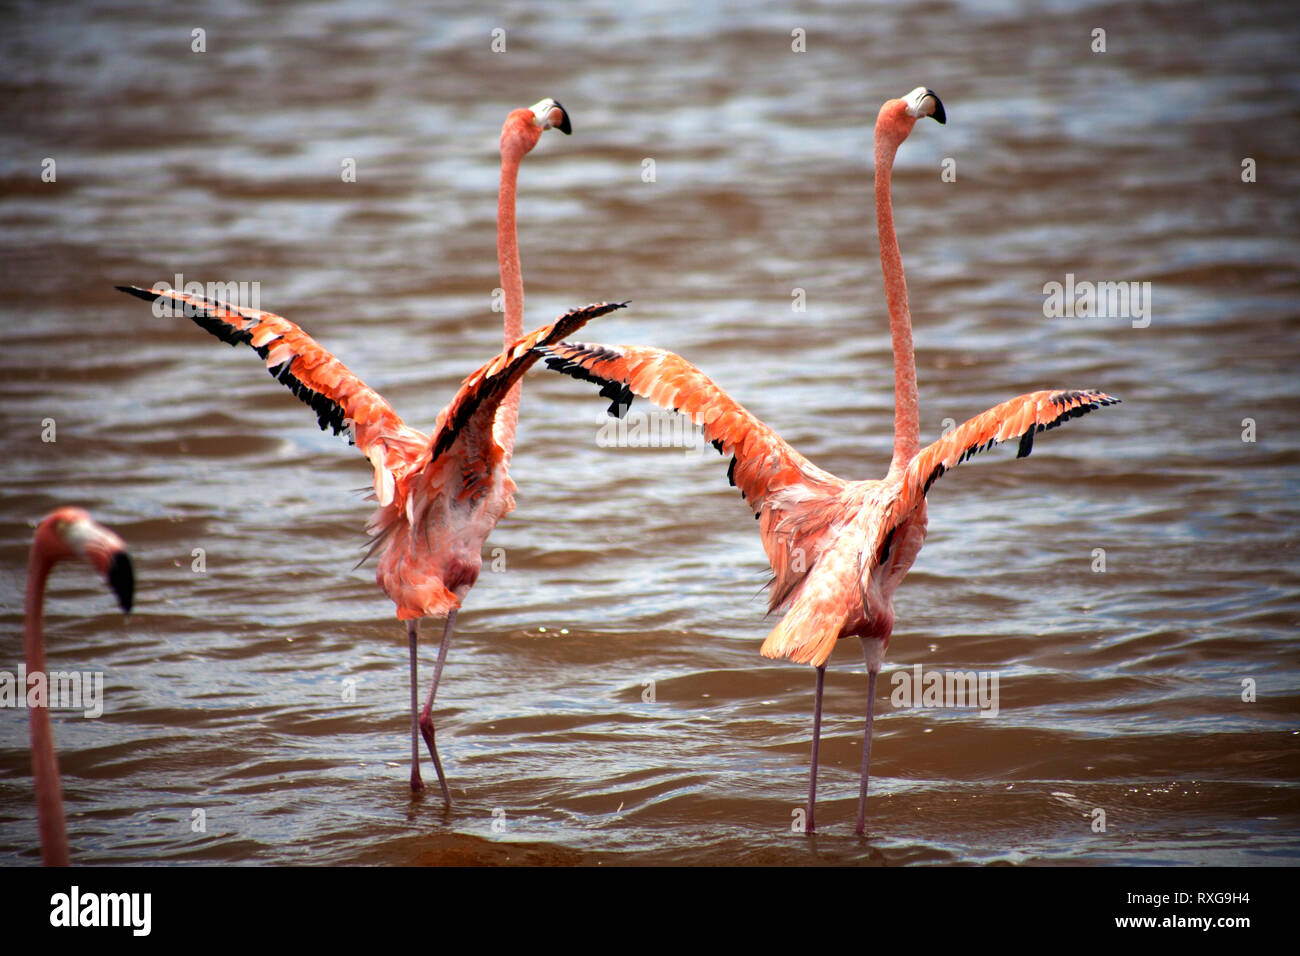 A couple of pink flamingos opening their wings in Celestun on Mexico's Yucatan peninsula, June 21, 2009. Stock Photo